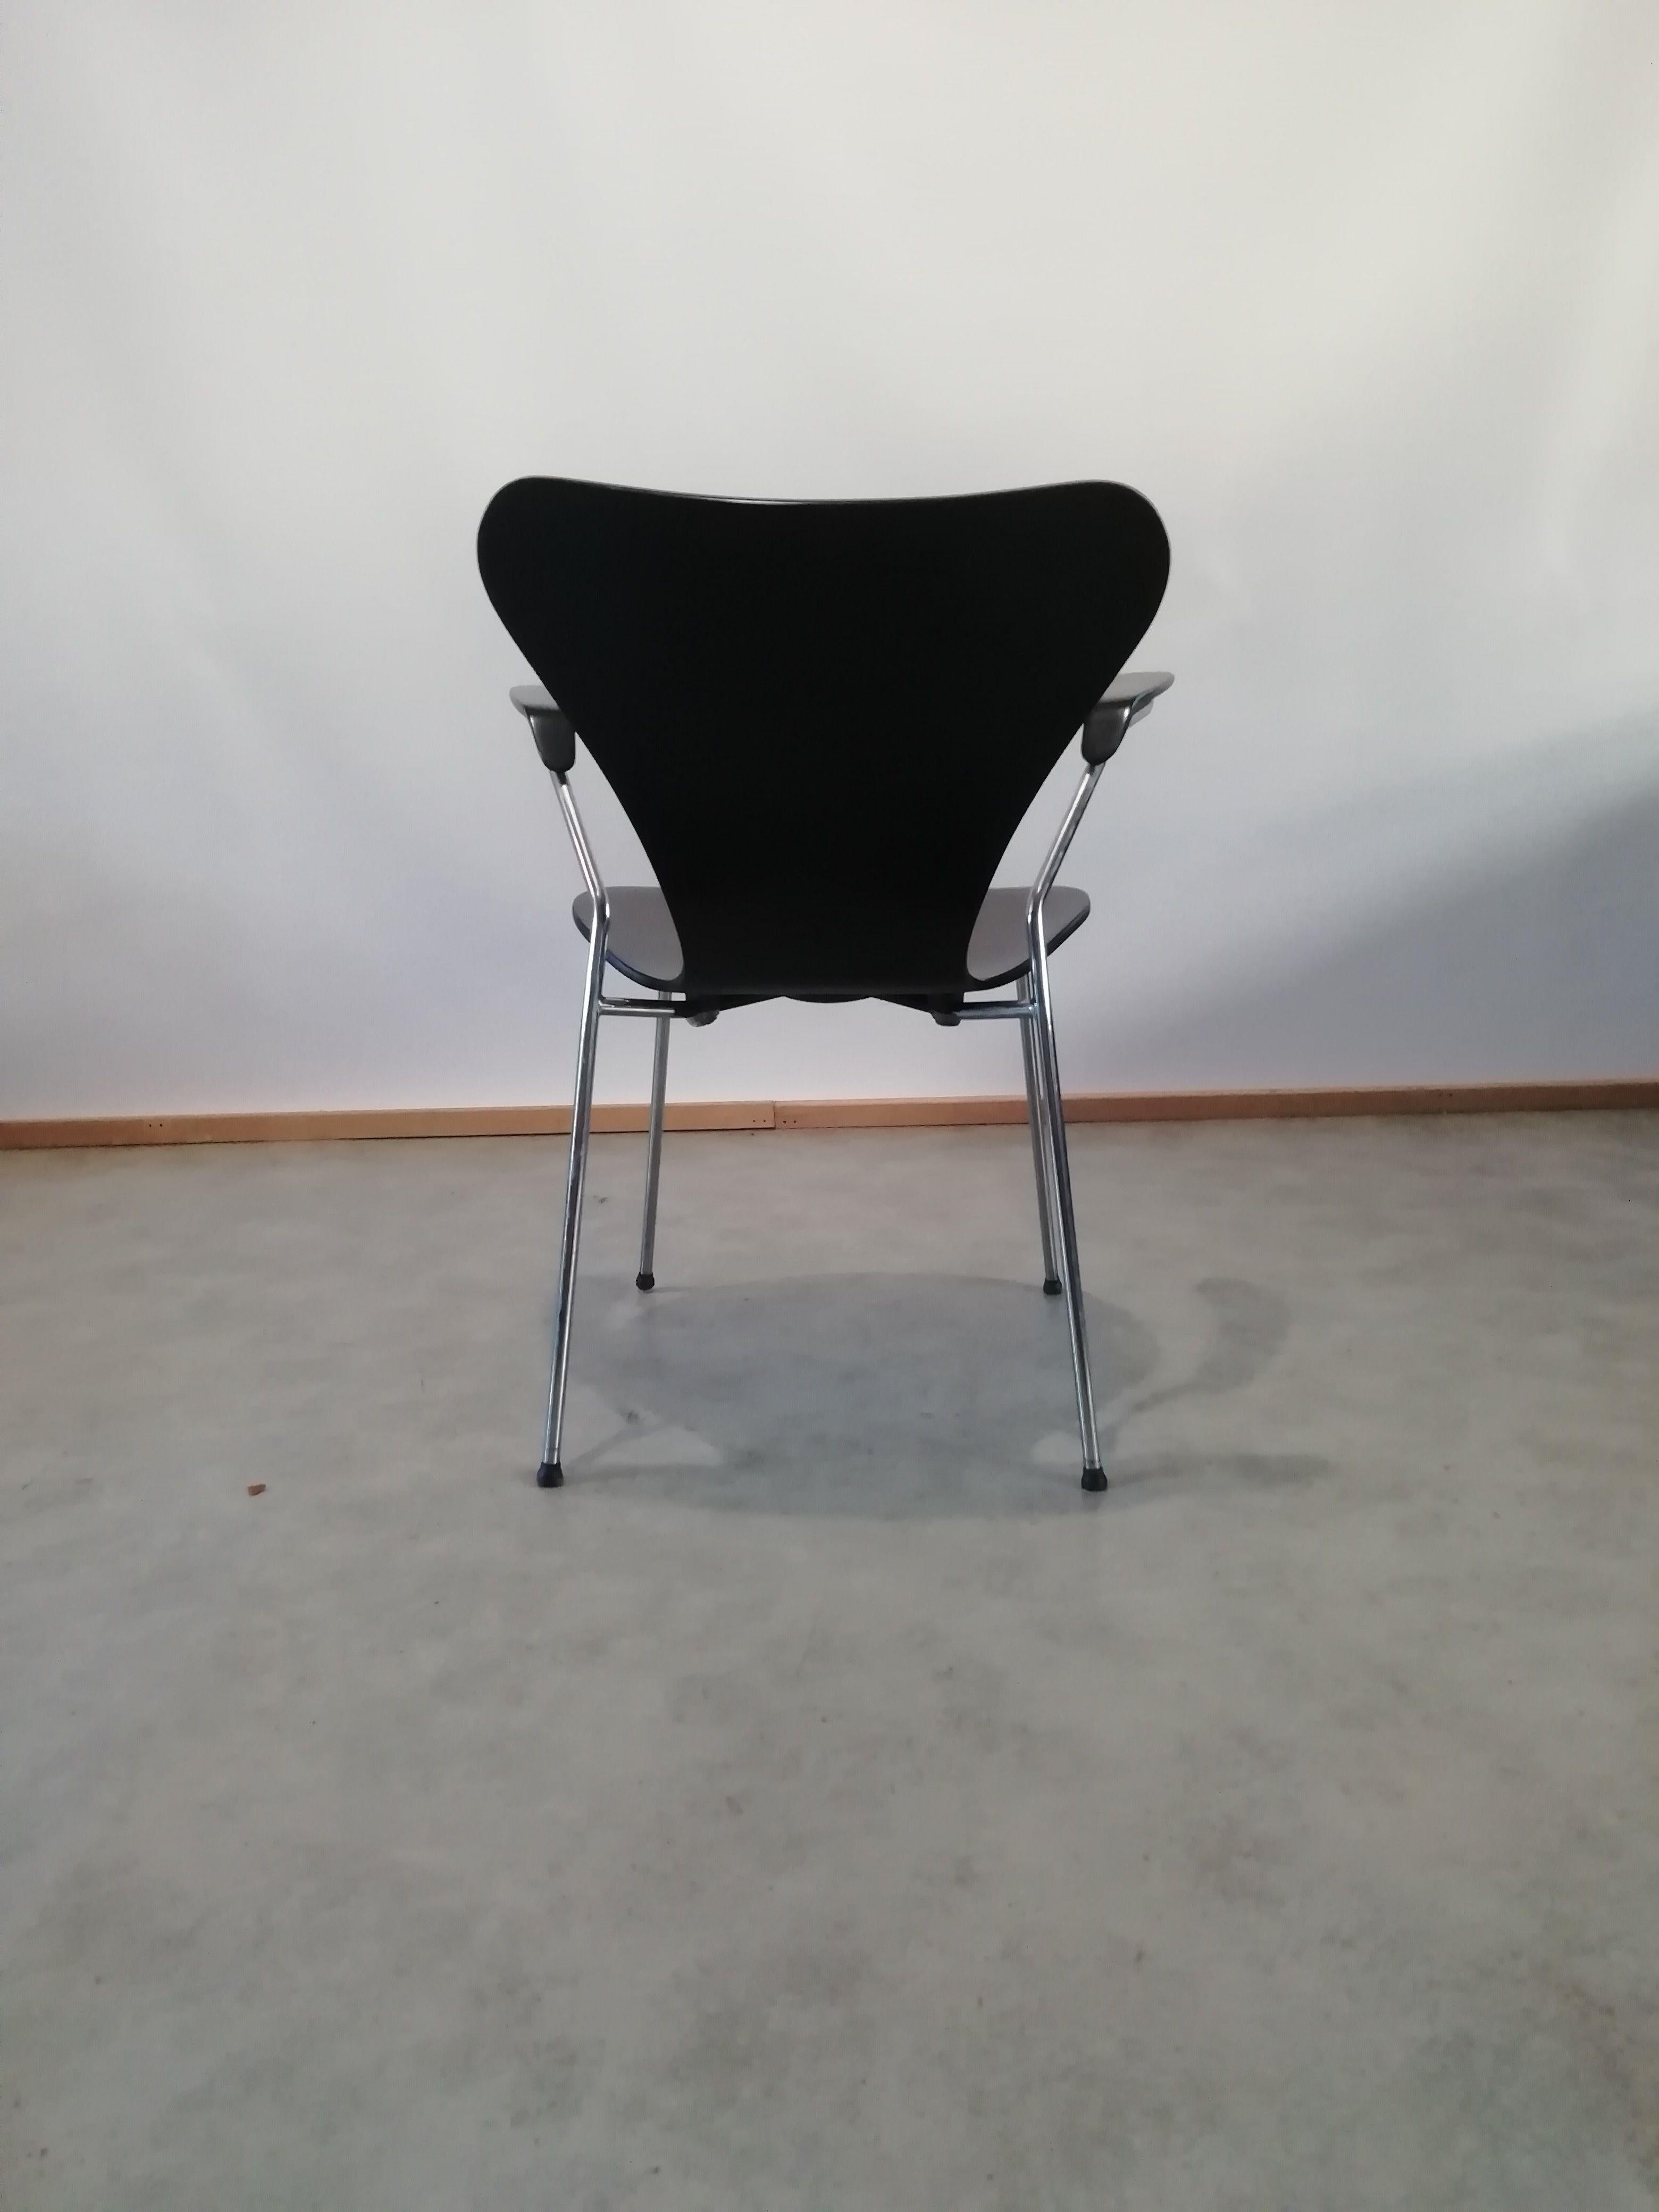 Mid-20th Century 20th Century Black Butterfly Series 7 Armchair by Arne Jacobsen for Fritz Hansen